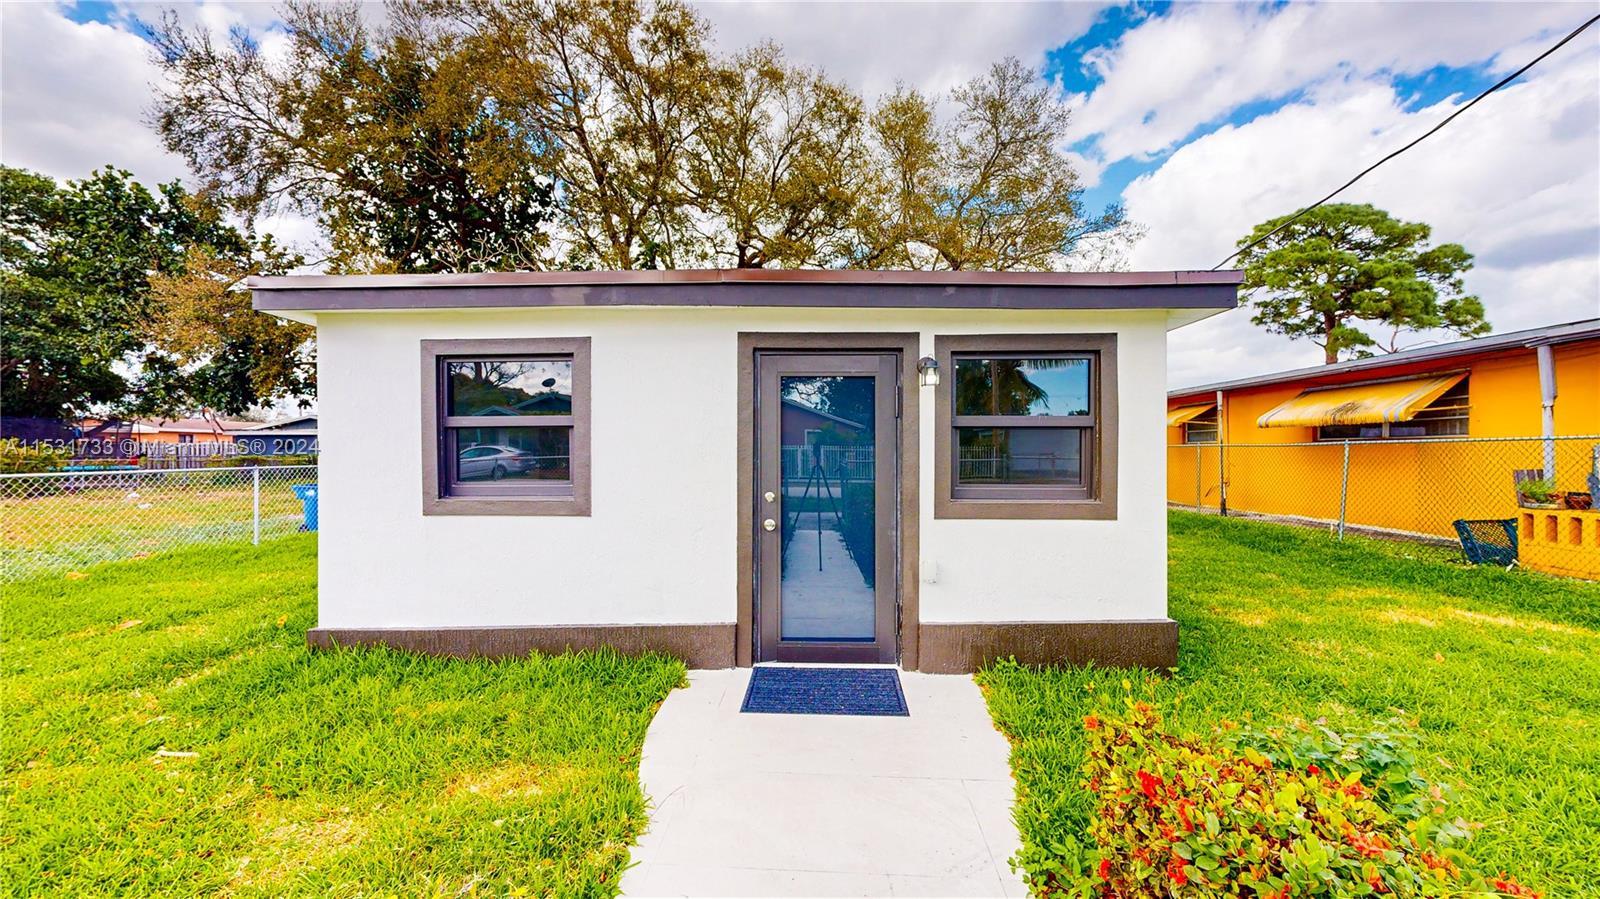 Photo of 2013 NW 153rd St in Miami Gardens, FL